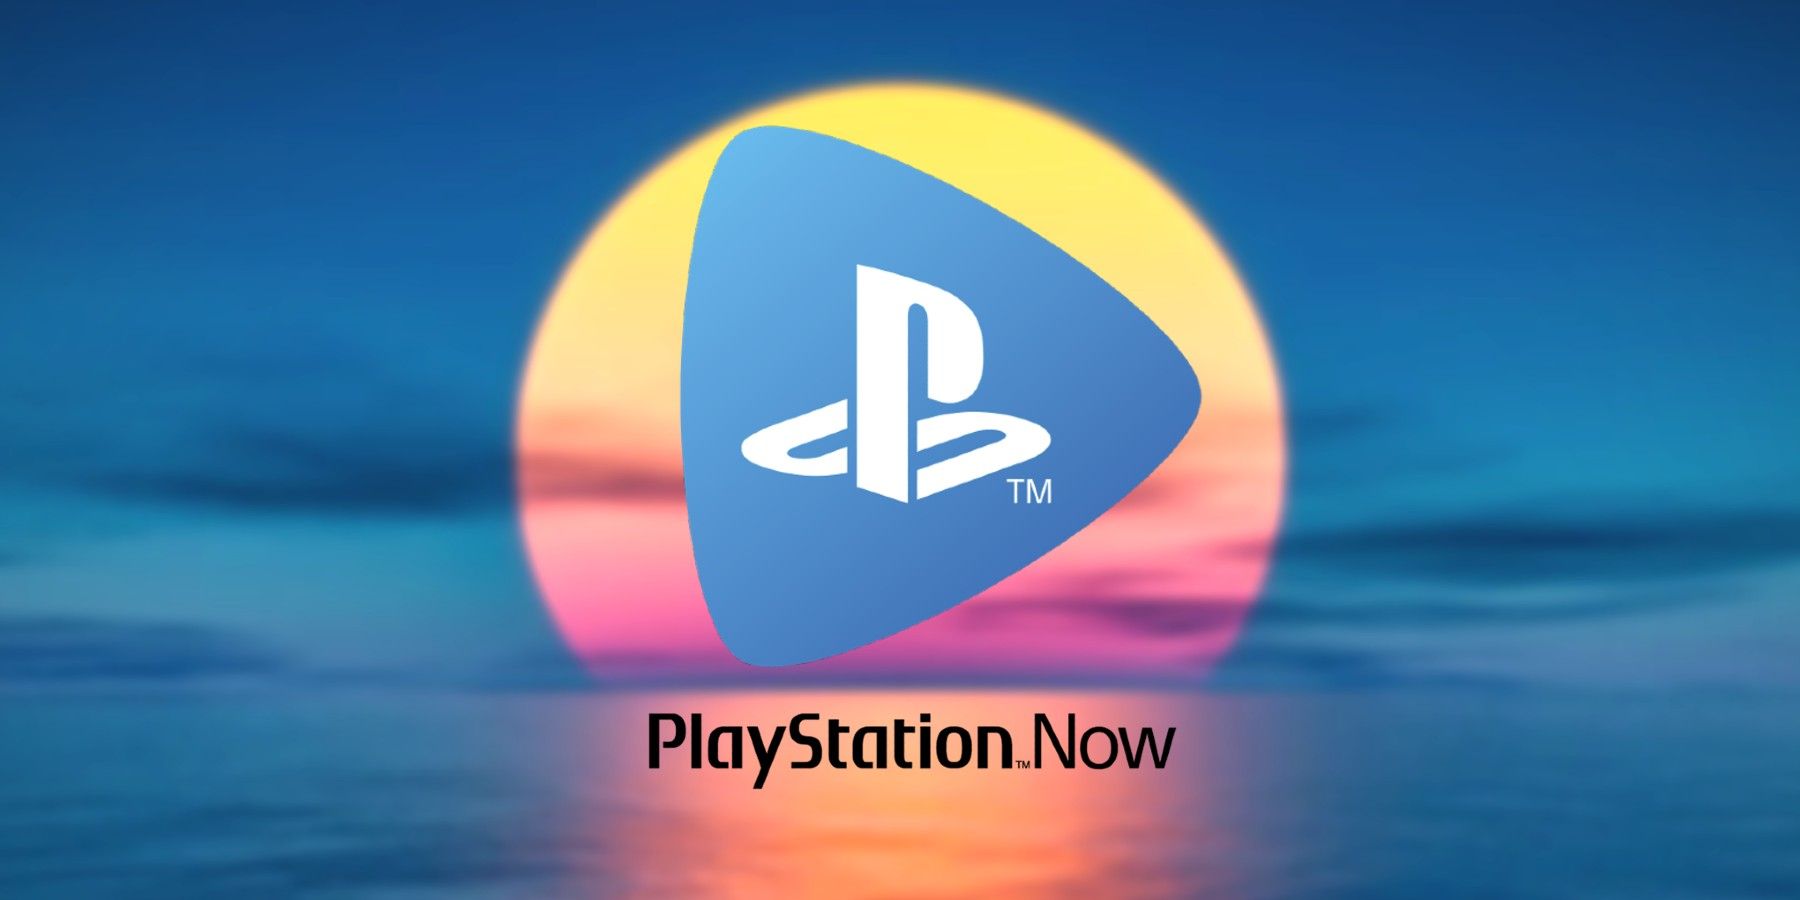 PlayStation Now was on its way to iPhone before Sony changed its mind